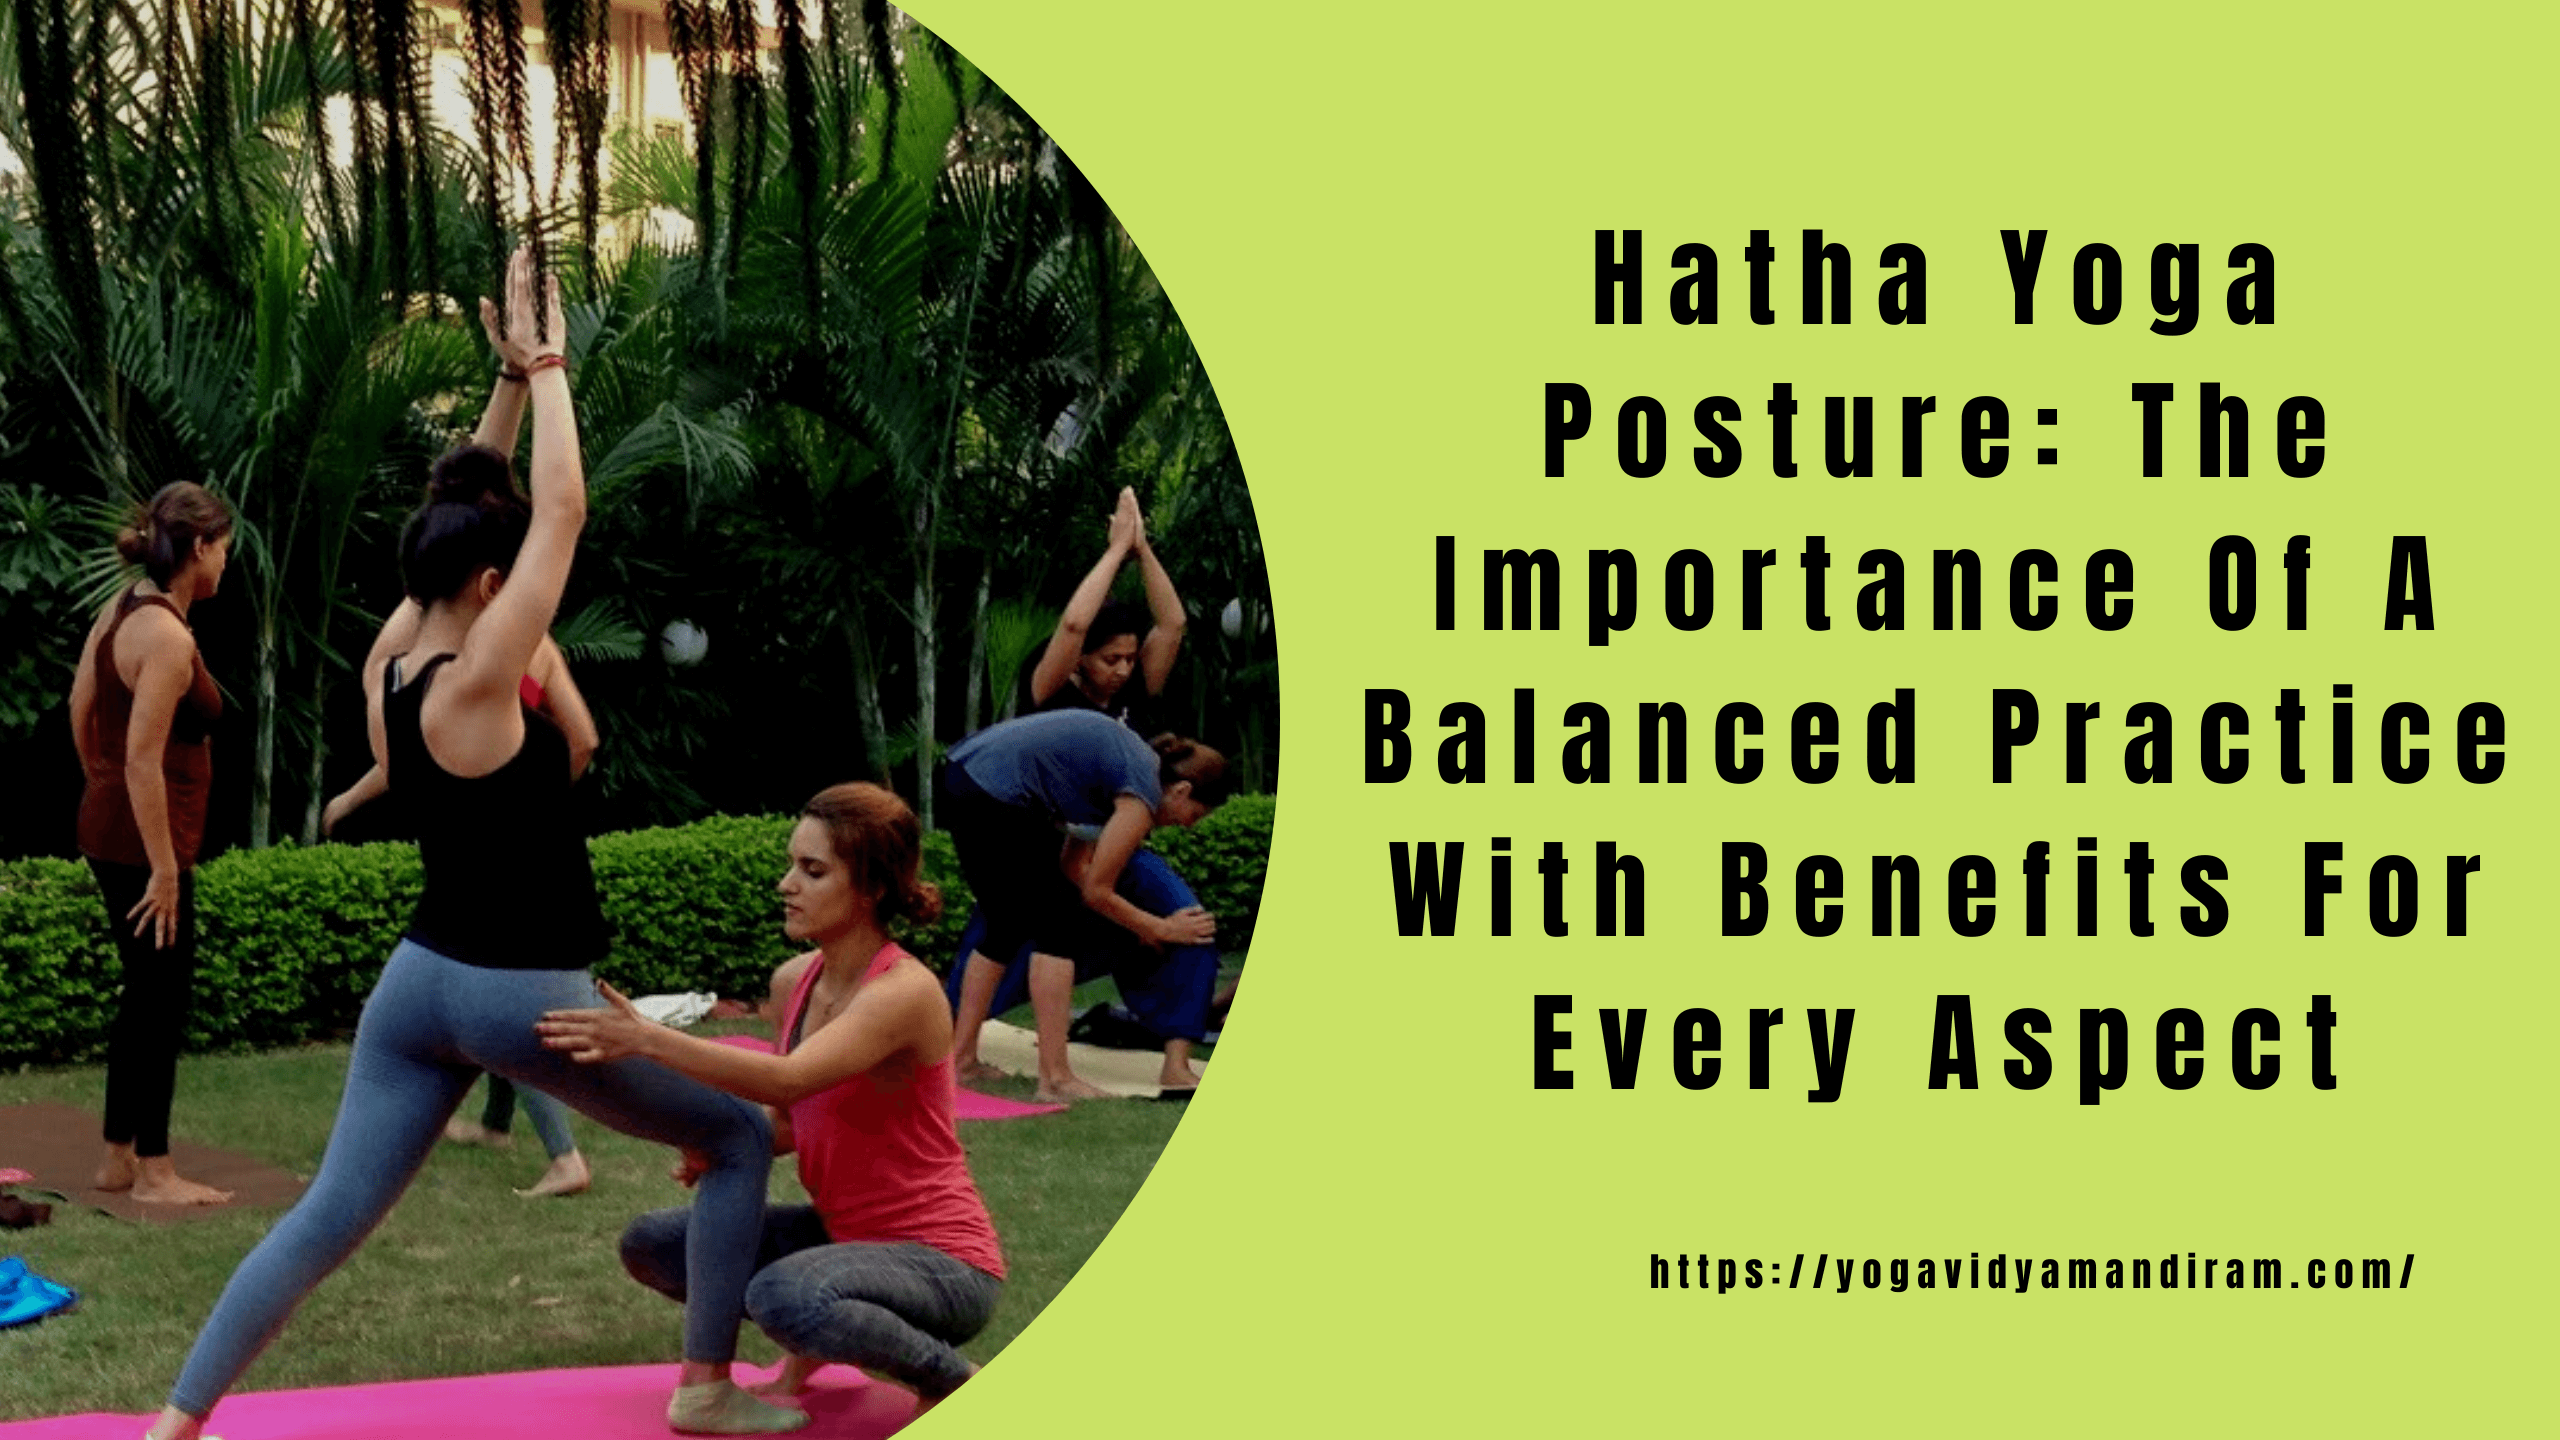 What Is Traditional Hatha Yoga? What Are Its Benefits